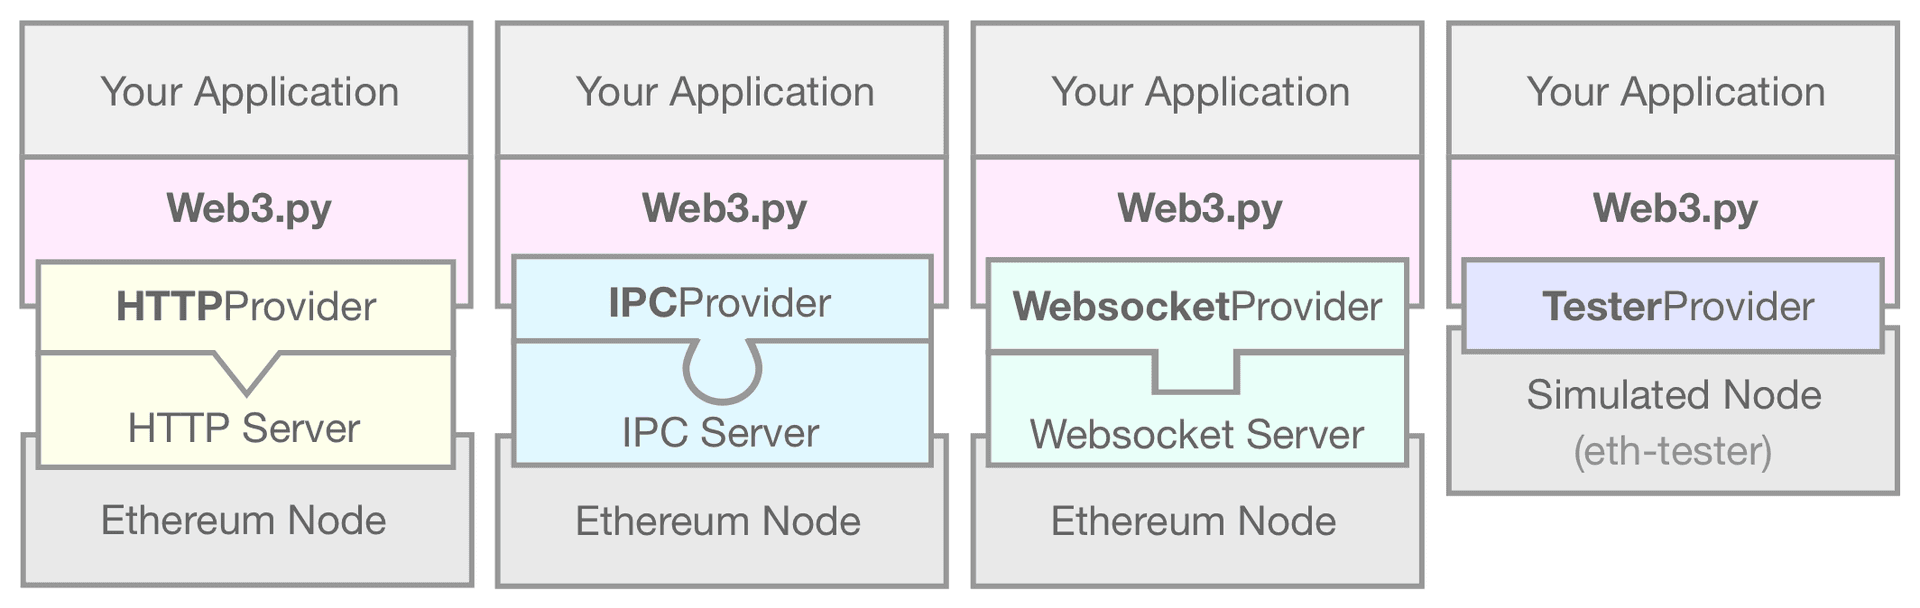 A diagram showing the EthereumTesterProvider linking your web3.py application to a simulated Ethereum node